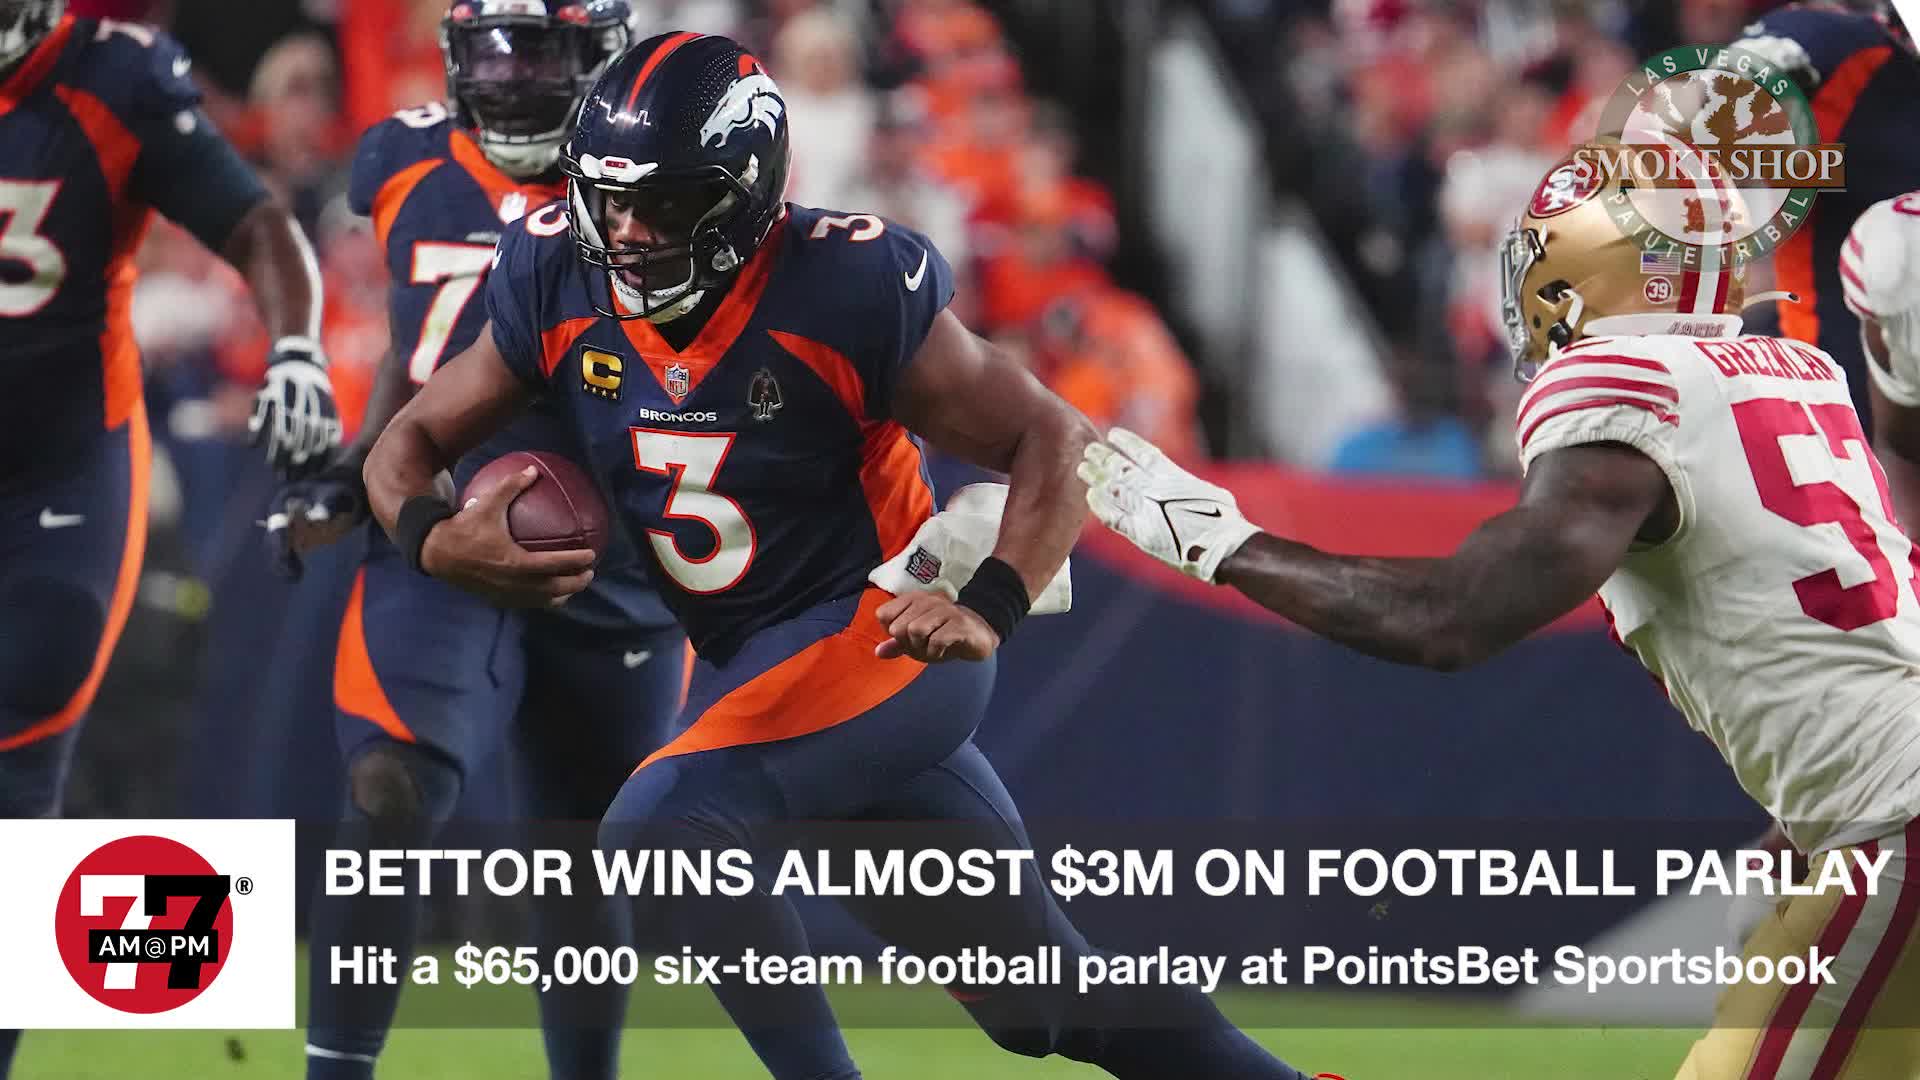 Bettor wins almost $3M on football parlay